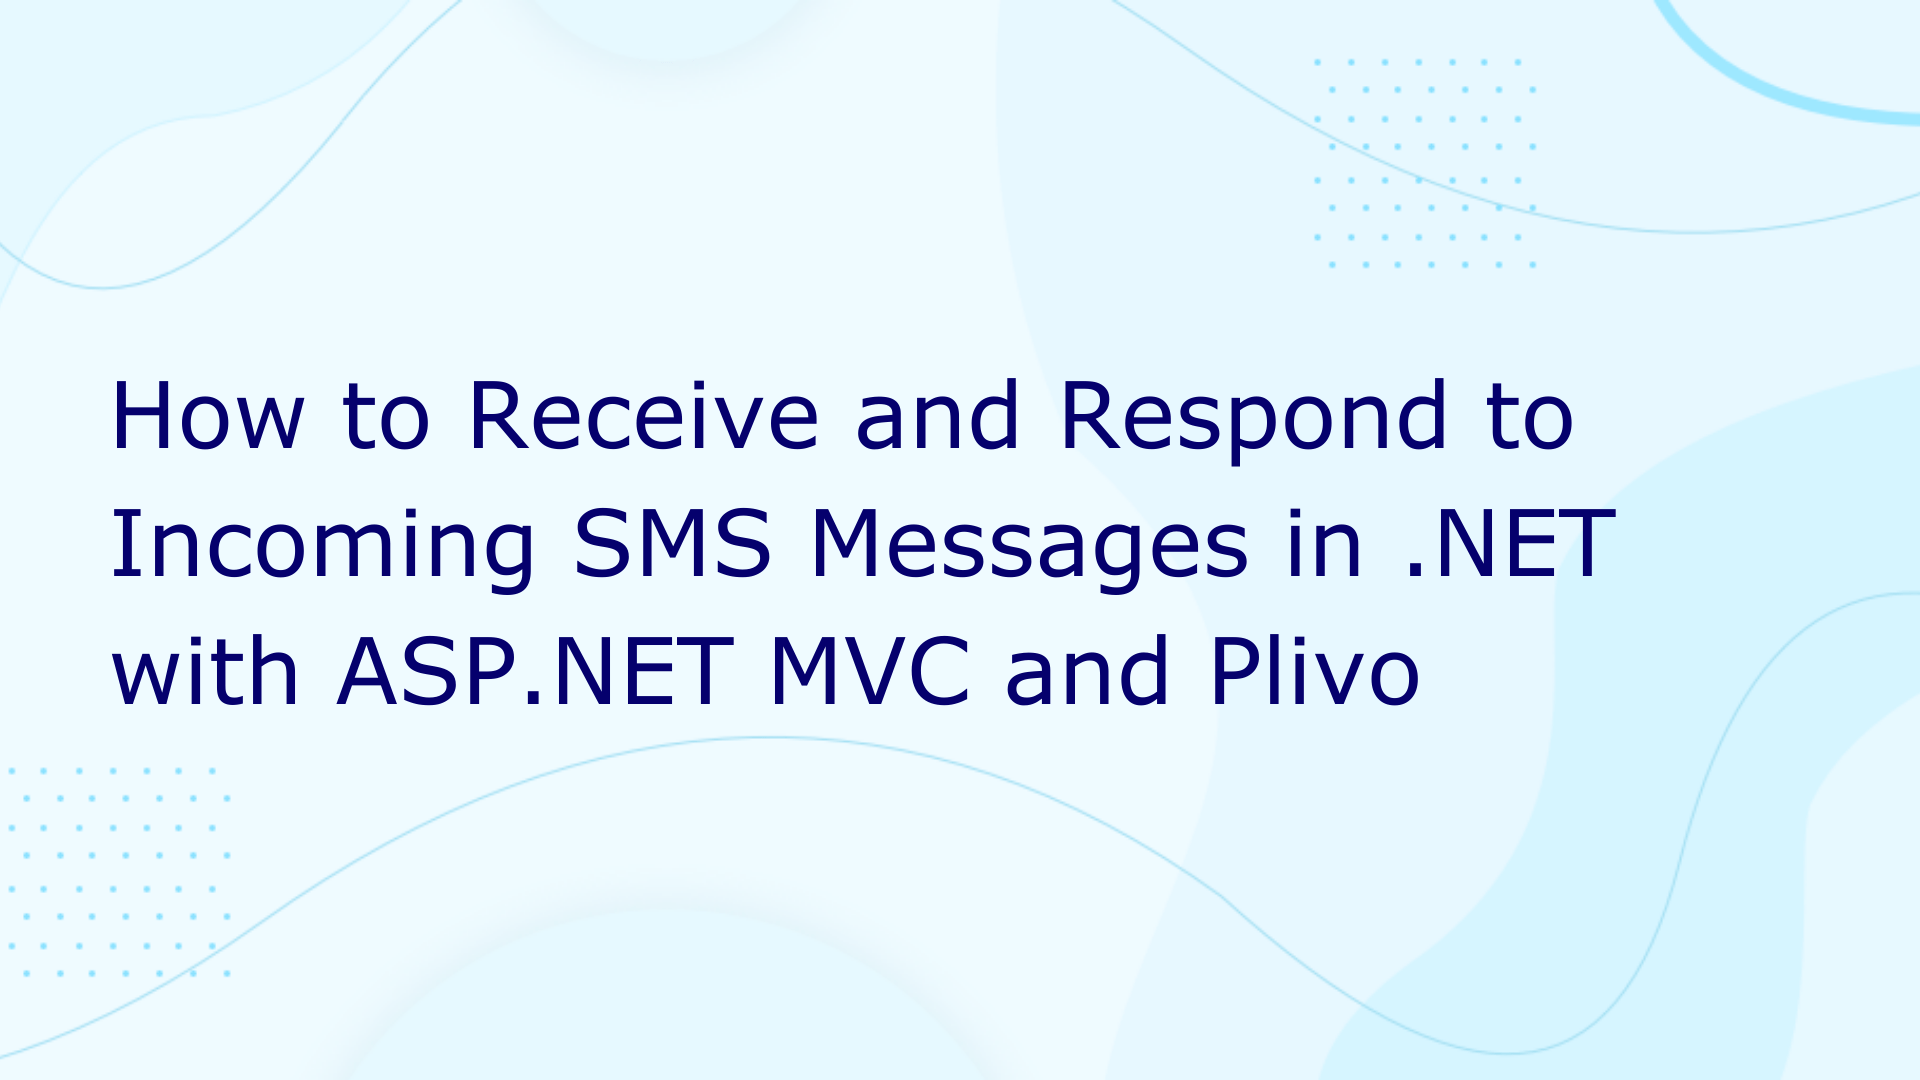 How to Receive and Respond to Incoming SMS Messages in .NET with ASP.NET MVC and Plivo